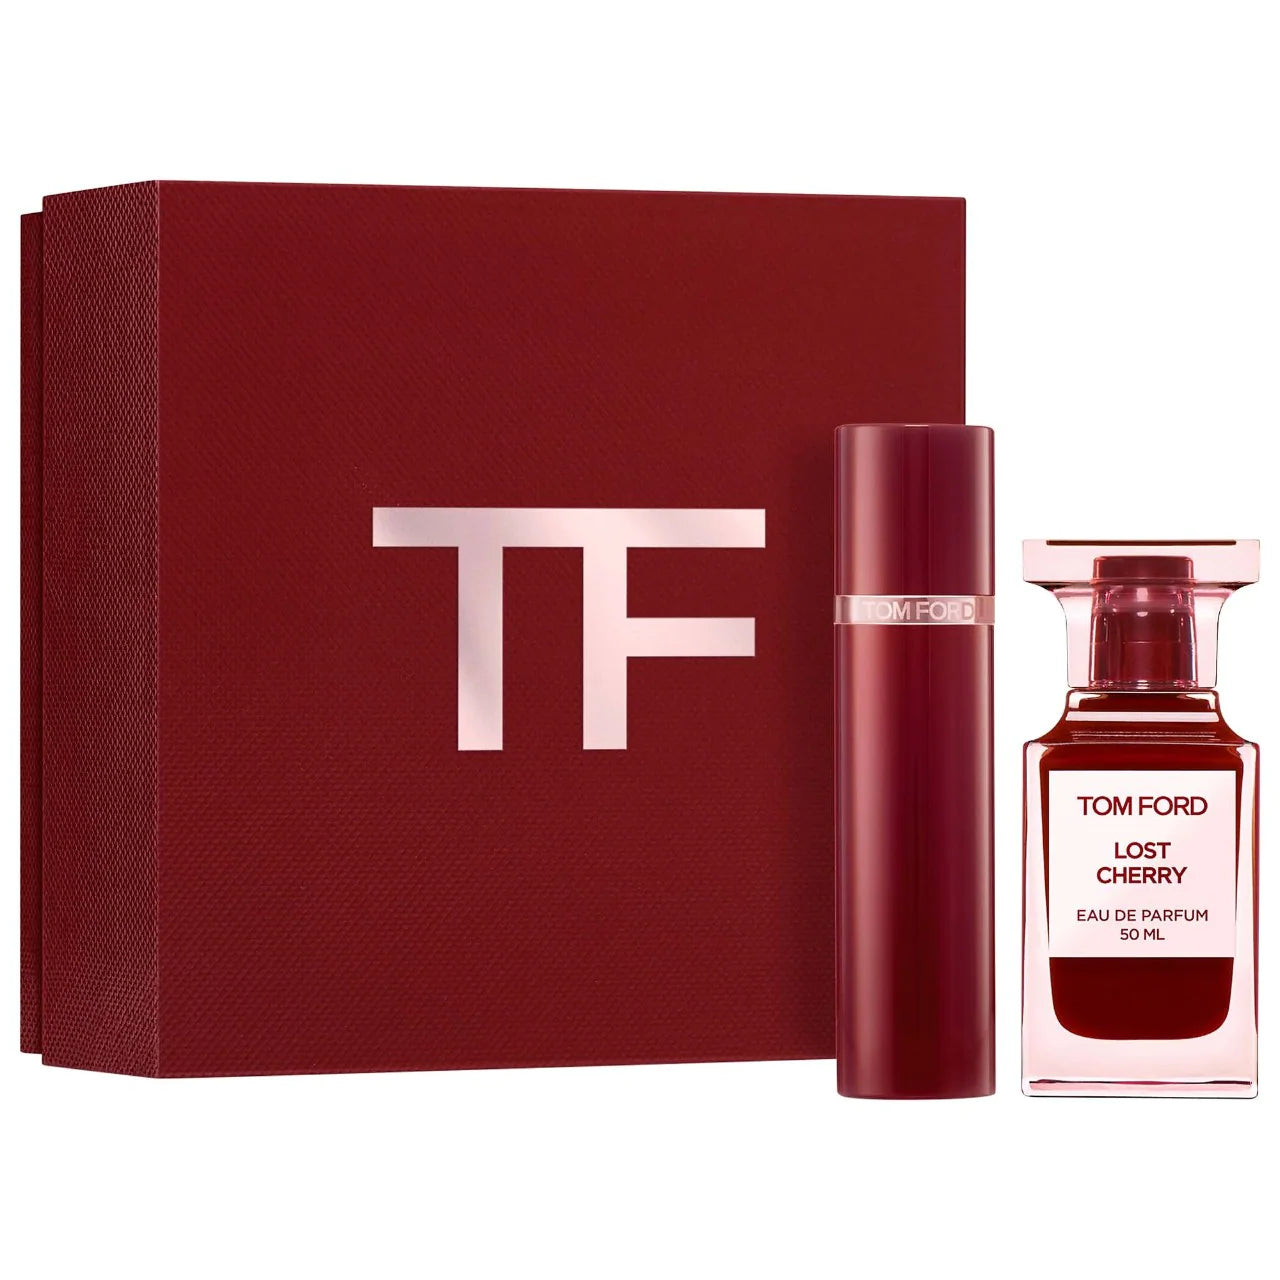 Tom Ford Lost Cherry 1.7 EDP 2 Piece Gift Set